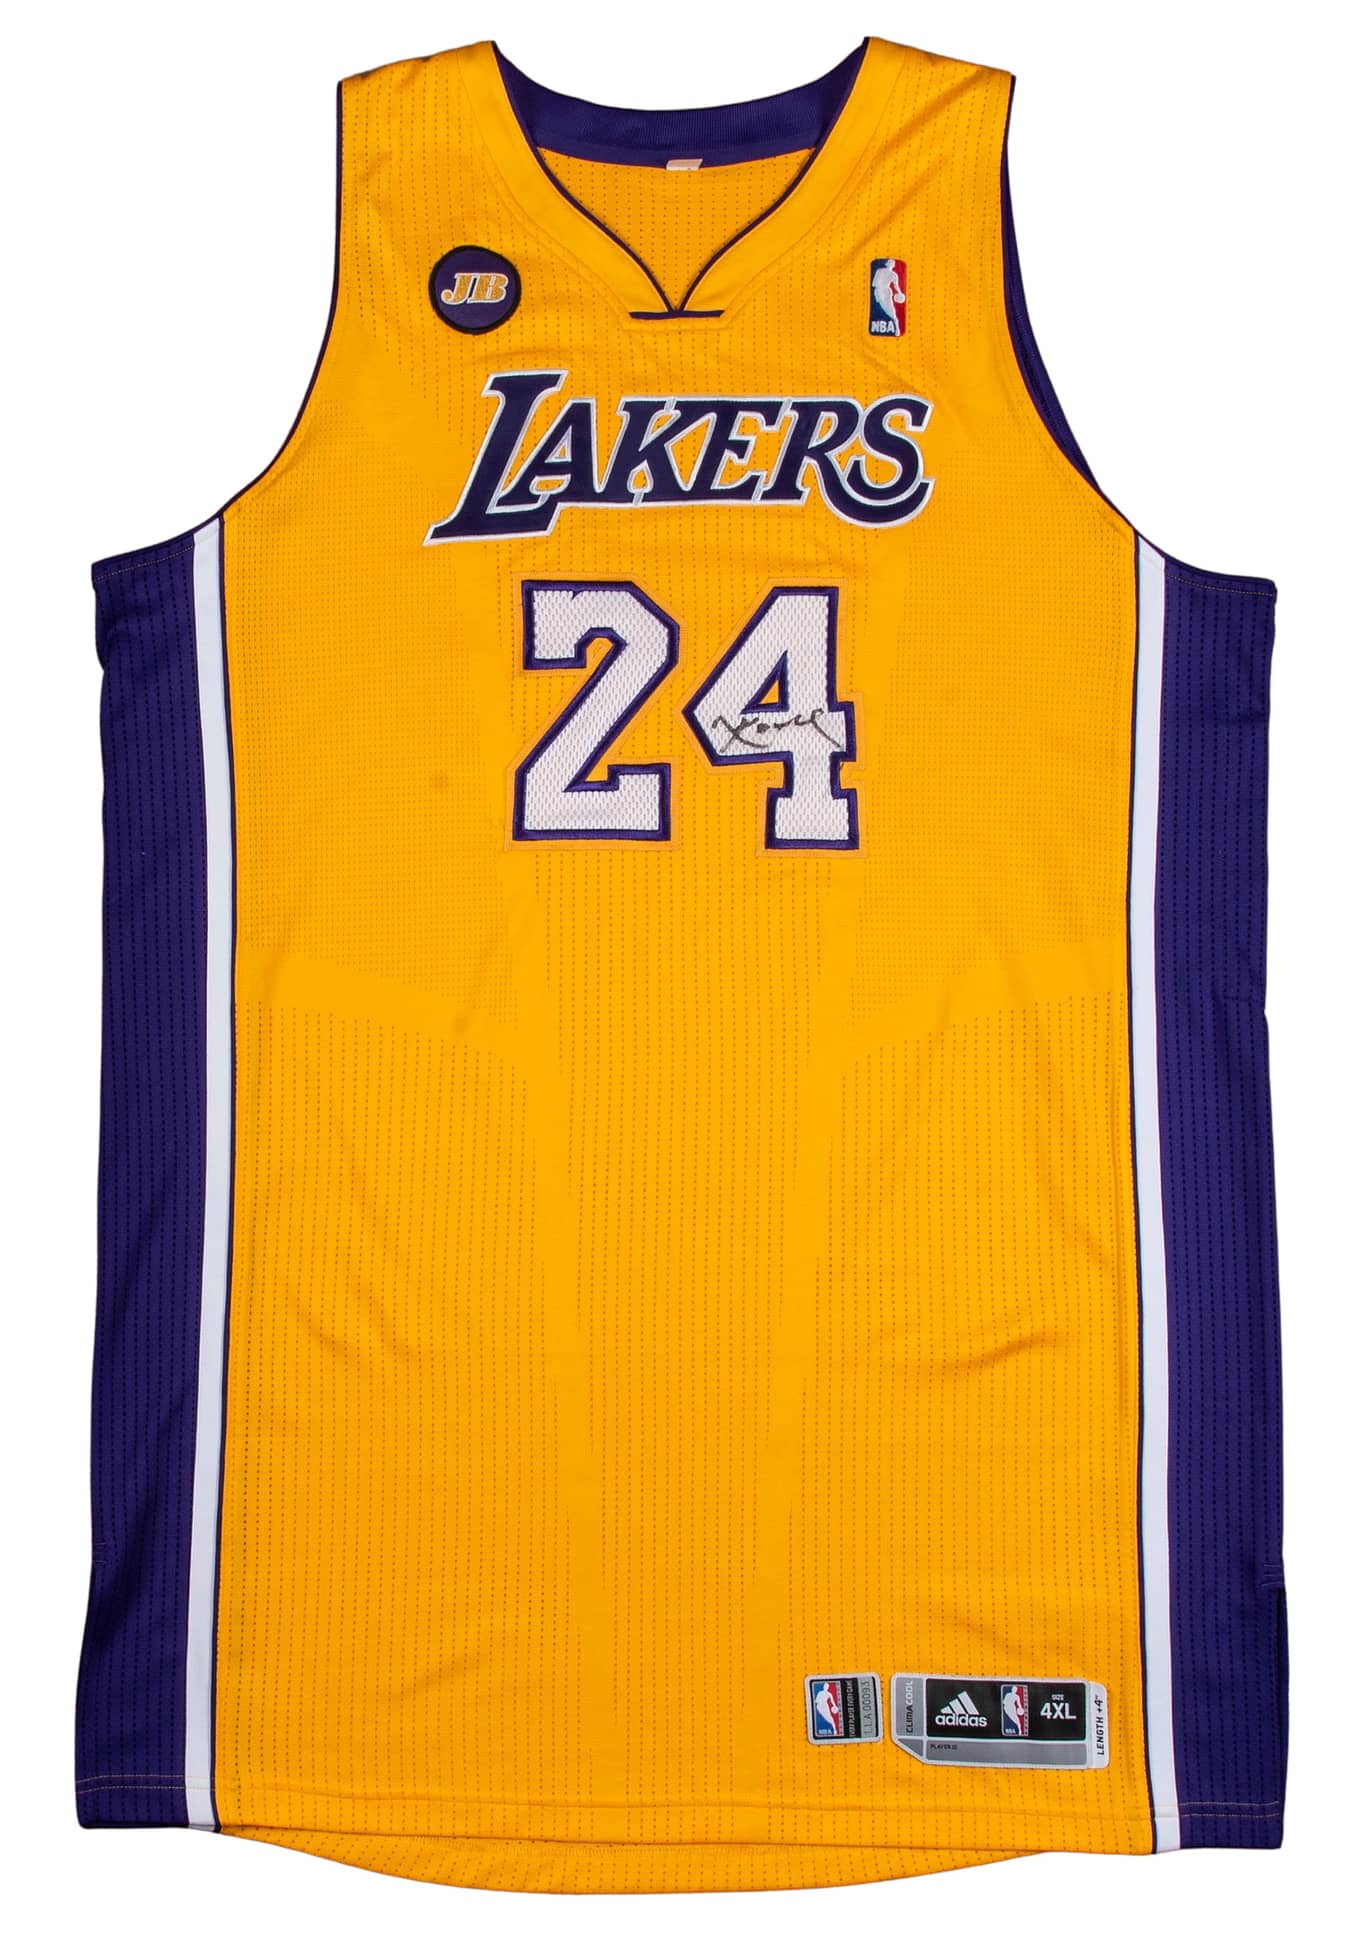 The Los Angeles Lakers jersey Kobe Bryant wore when he tore his Achilles in 2013